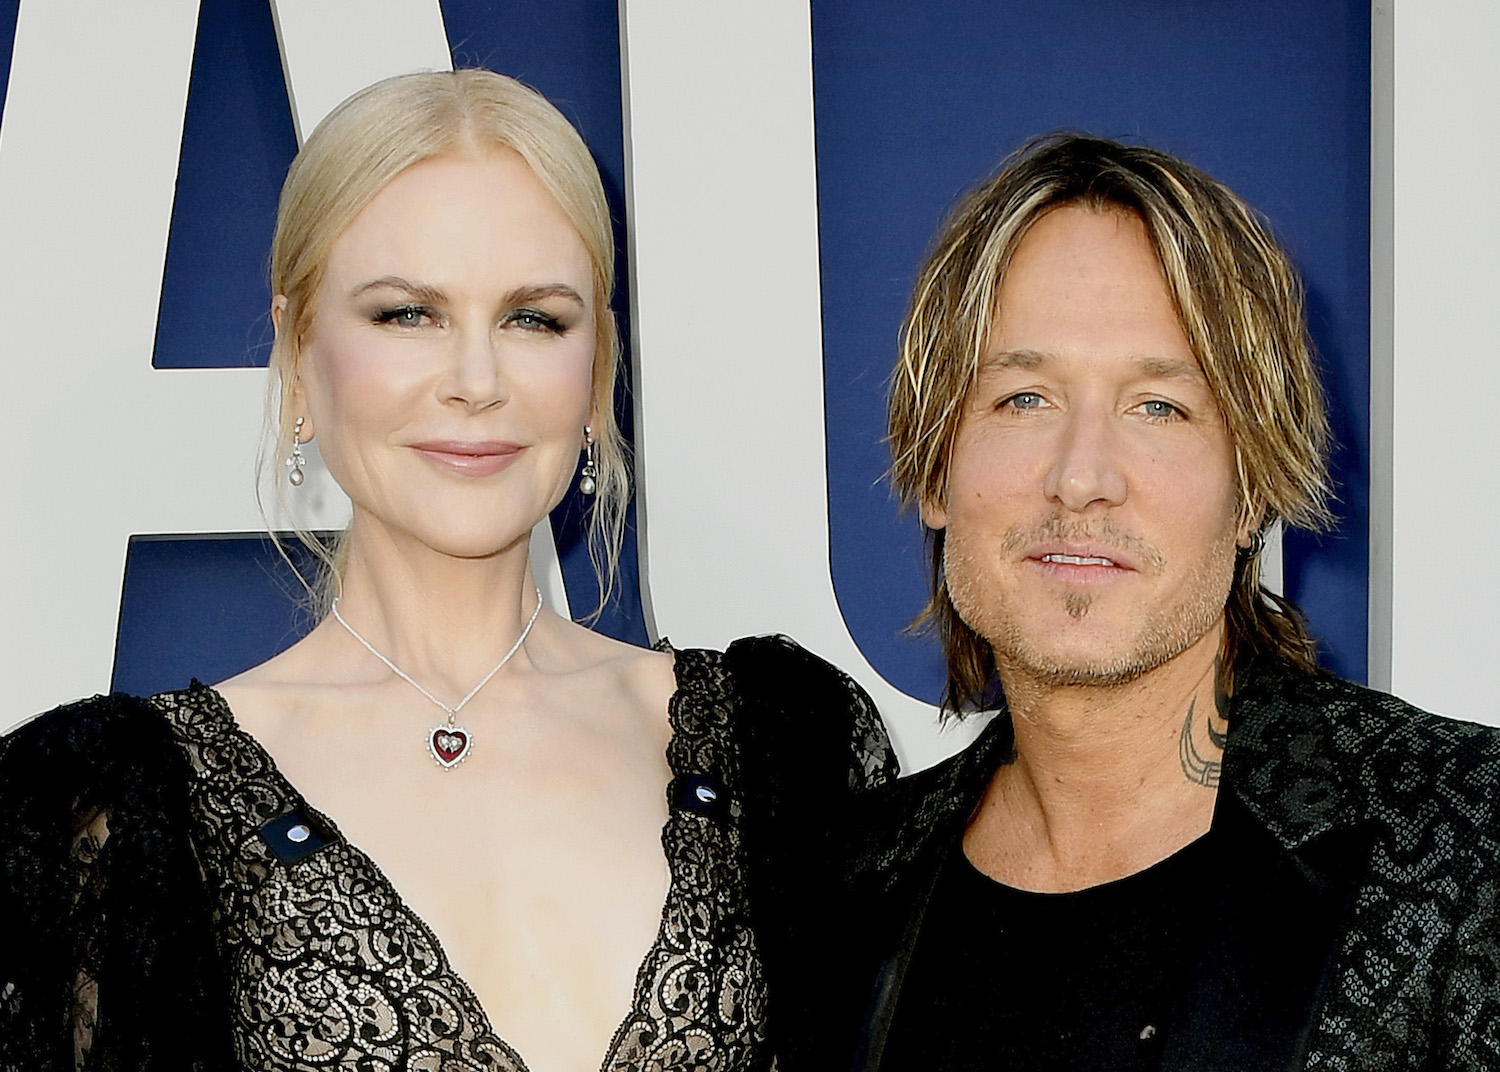 LAS VEGAS, NEVADA - APRIL 07: (L-R) Nicole Kidman and Keith Urban attend the 54th Academy Of Country Music Awards at MGM Grand Hotel & Casino on April 07, 2019 in Las Vegas, Nevada. (Photo by Frazer Harrison/ACMA2019/Getty Images for ACM)